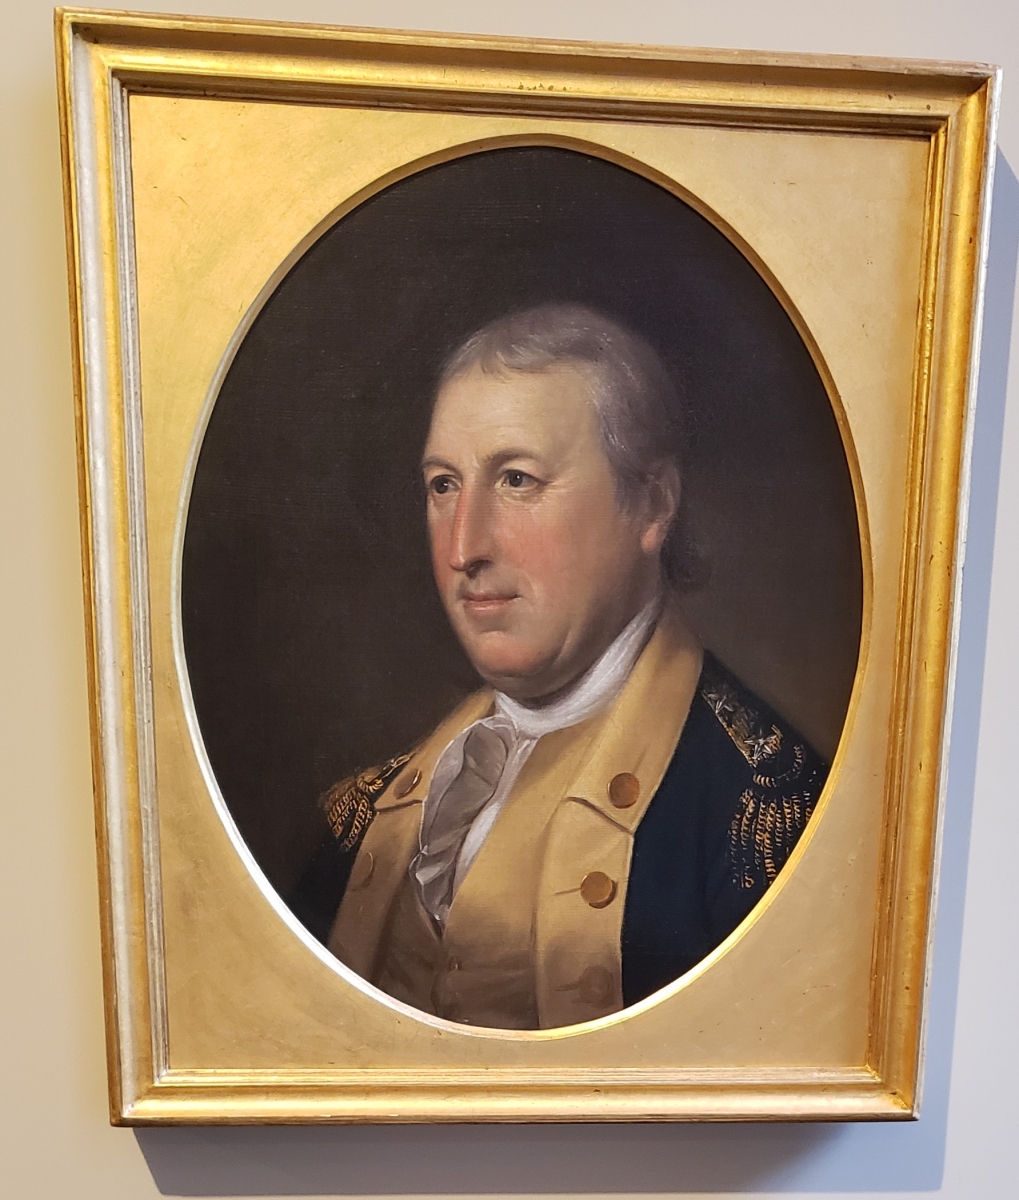 Horatio Gates Portrait located in the Second Bank of the United States Portrait Gallery